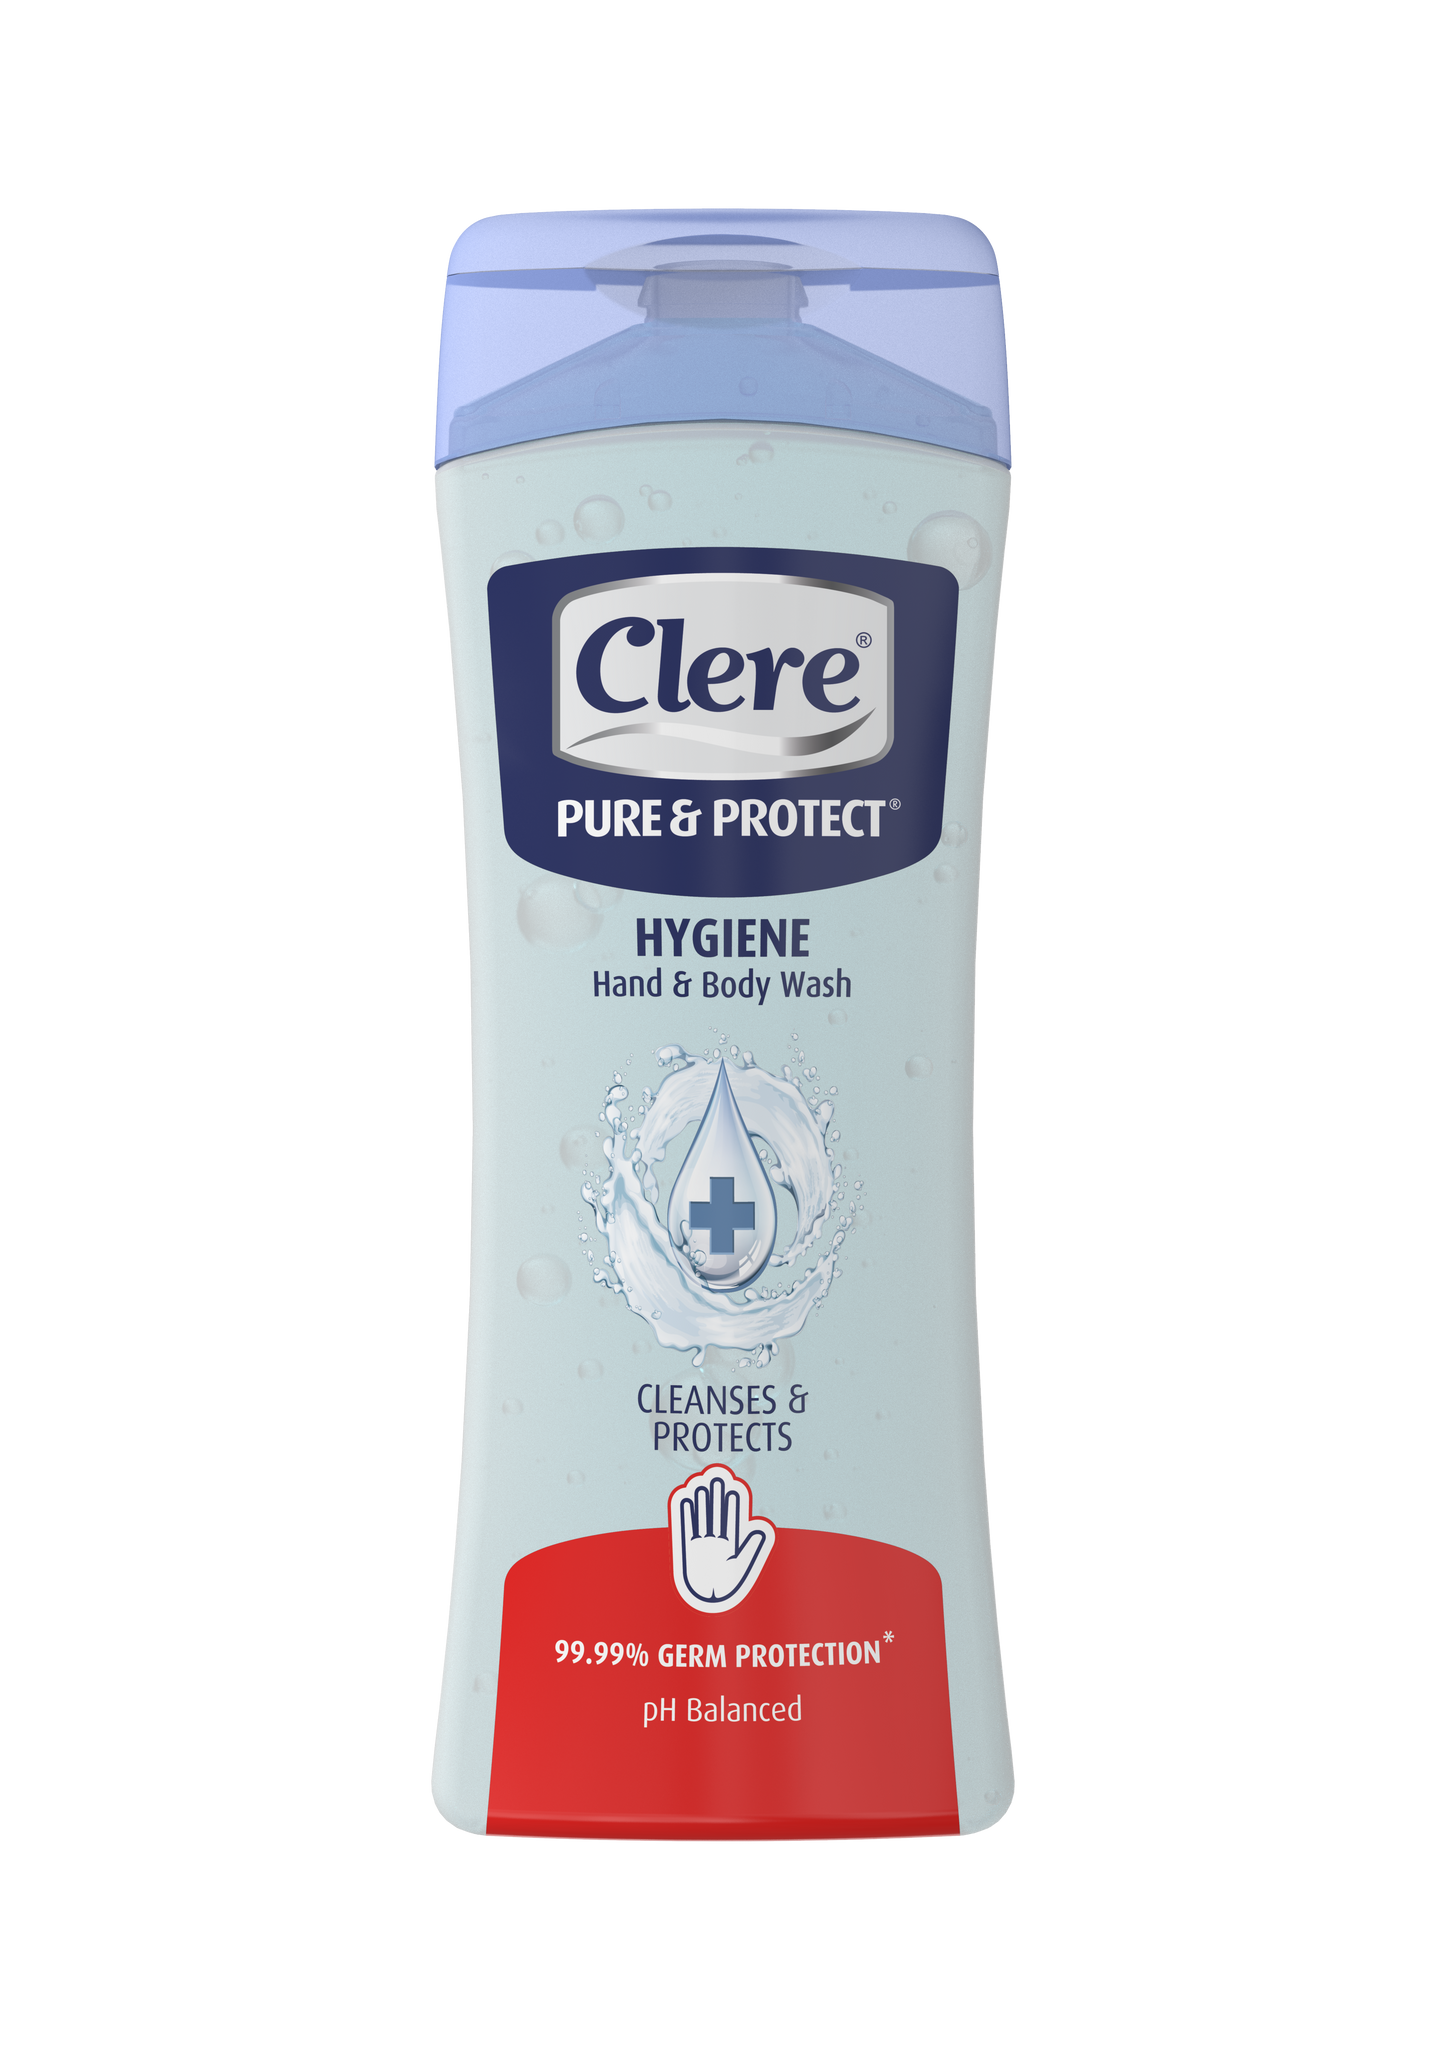 Clere Pure & Protect Hygiene Hand & Body Wash (lotion bottle) - 400ml